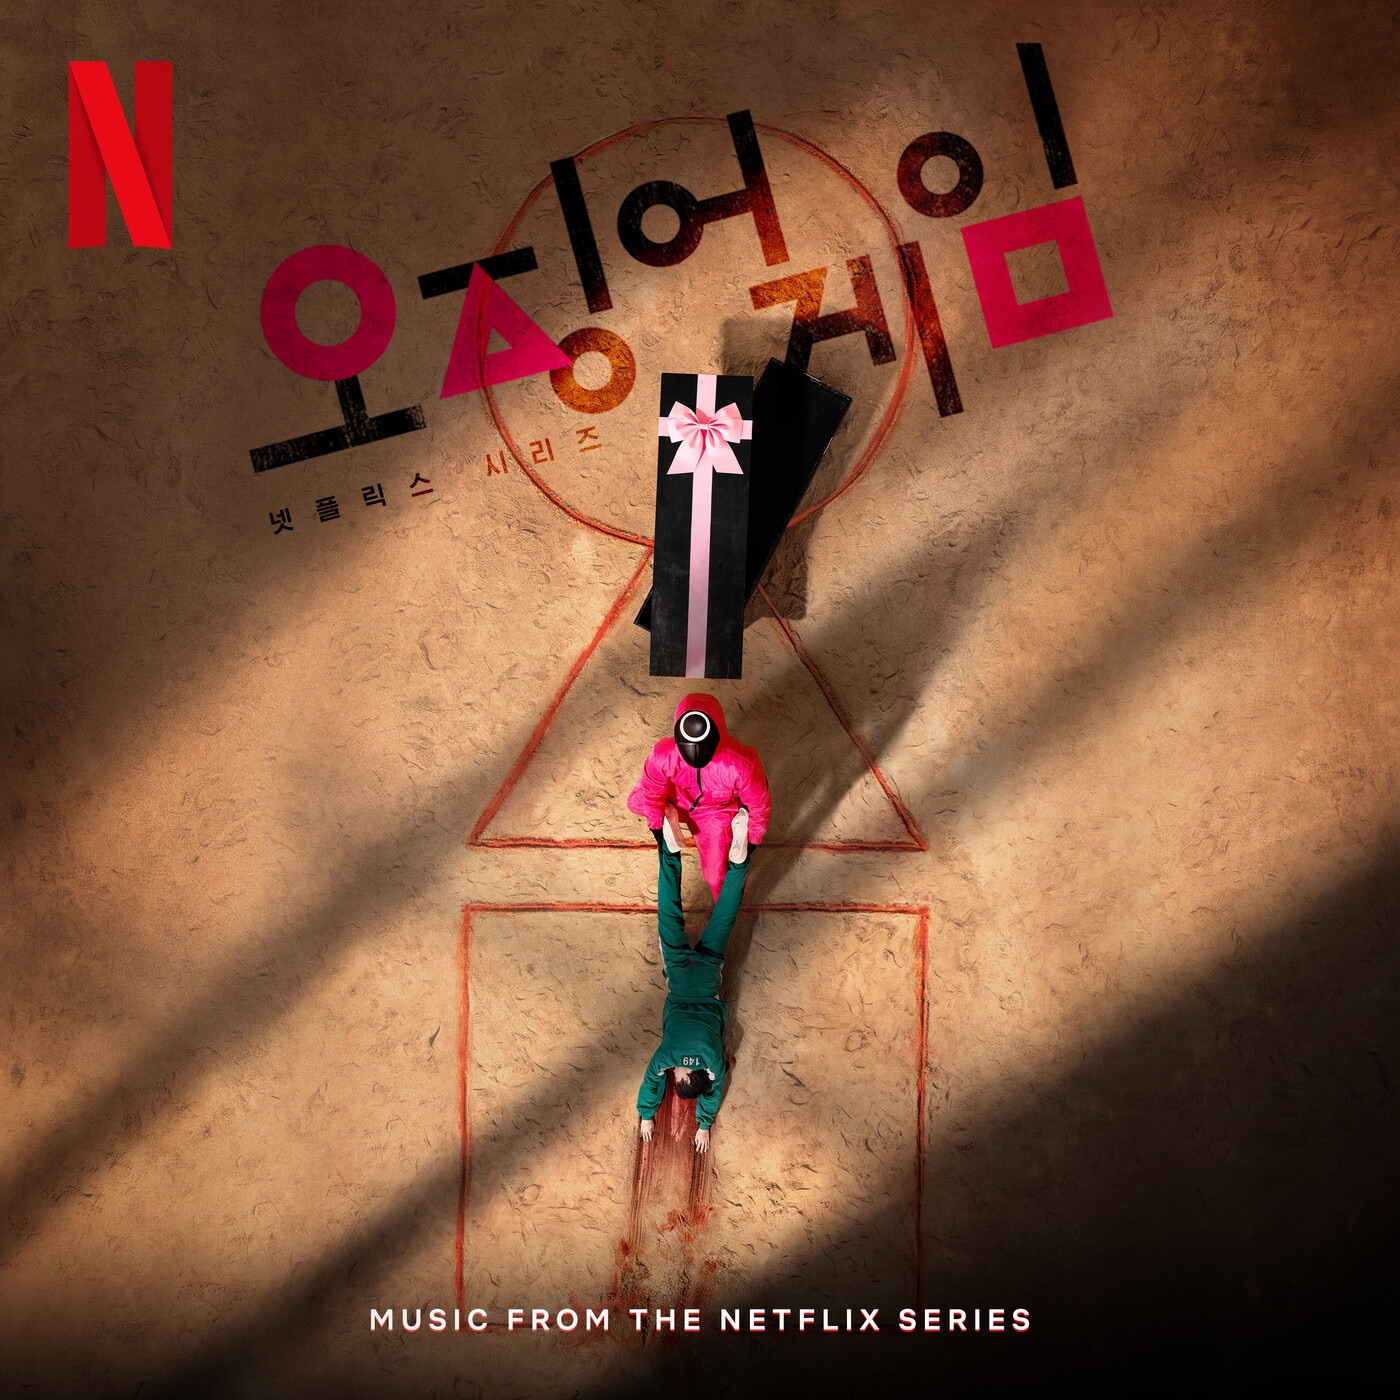 Squid Game (Original Soundtrack from the Netflix Series) by Various Artists